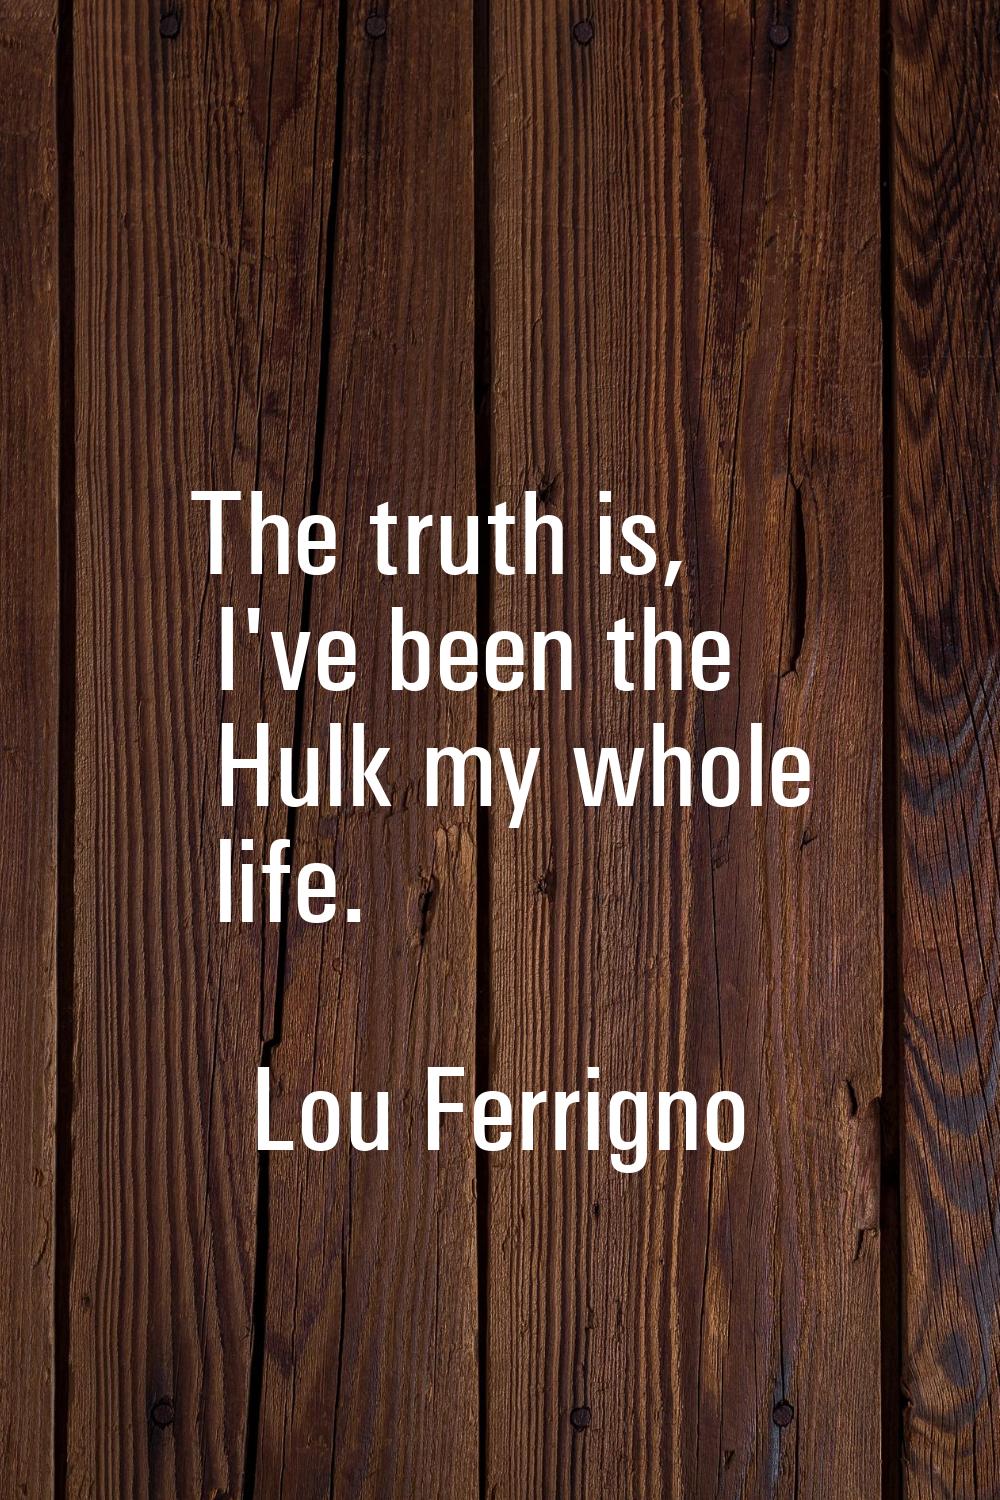 The truth is, I've been the Hulk my whole life.